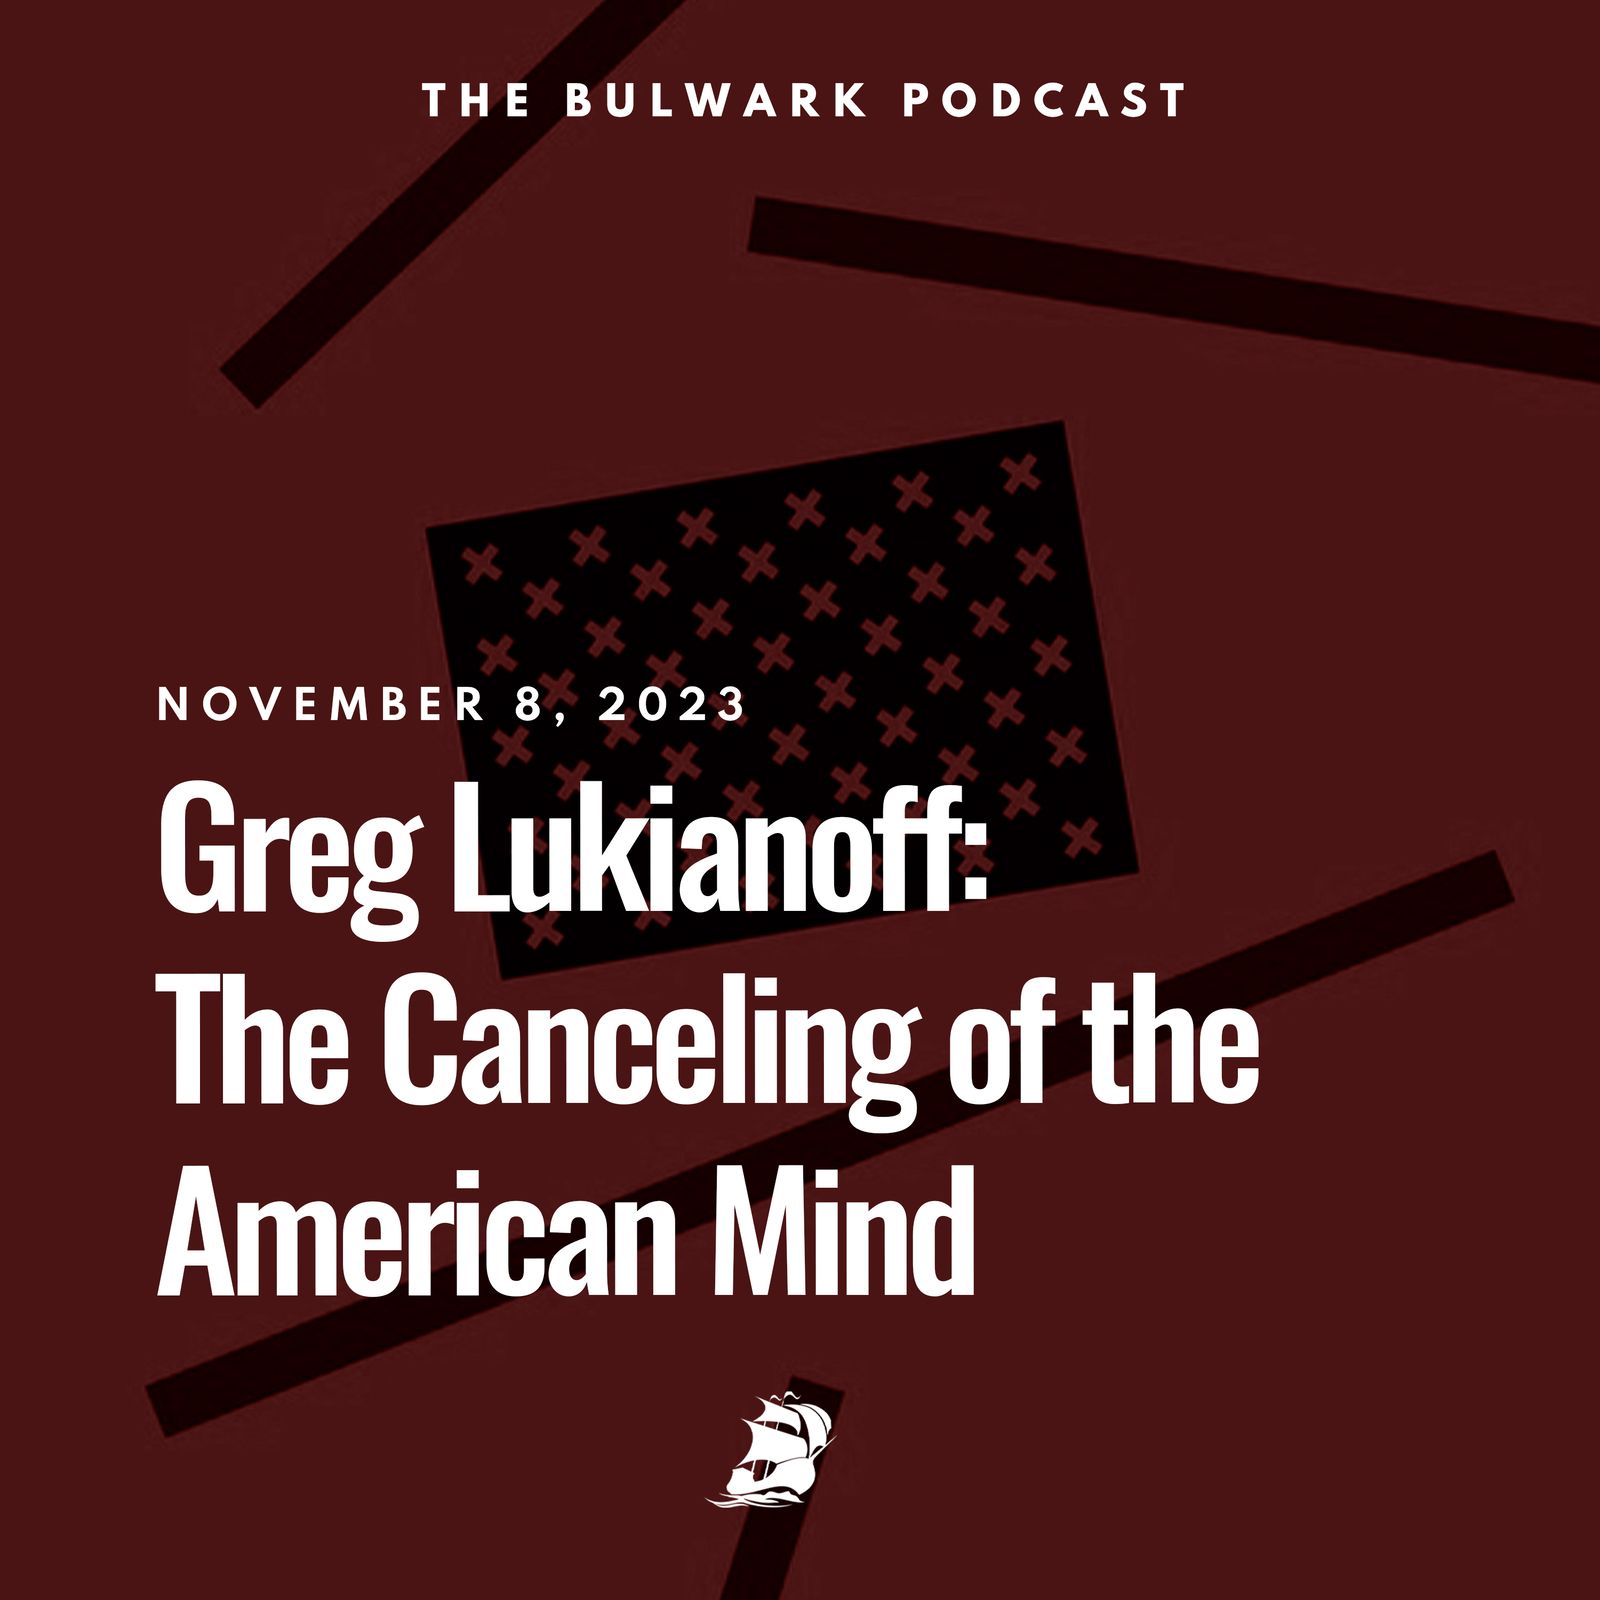 Greg Lukianoff: The Canceling of the American Mind